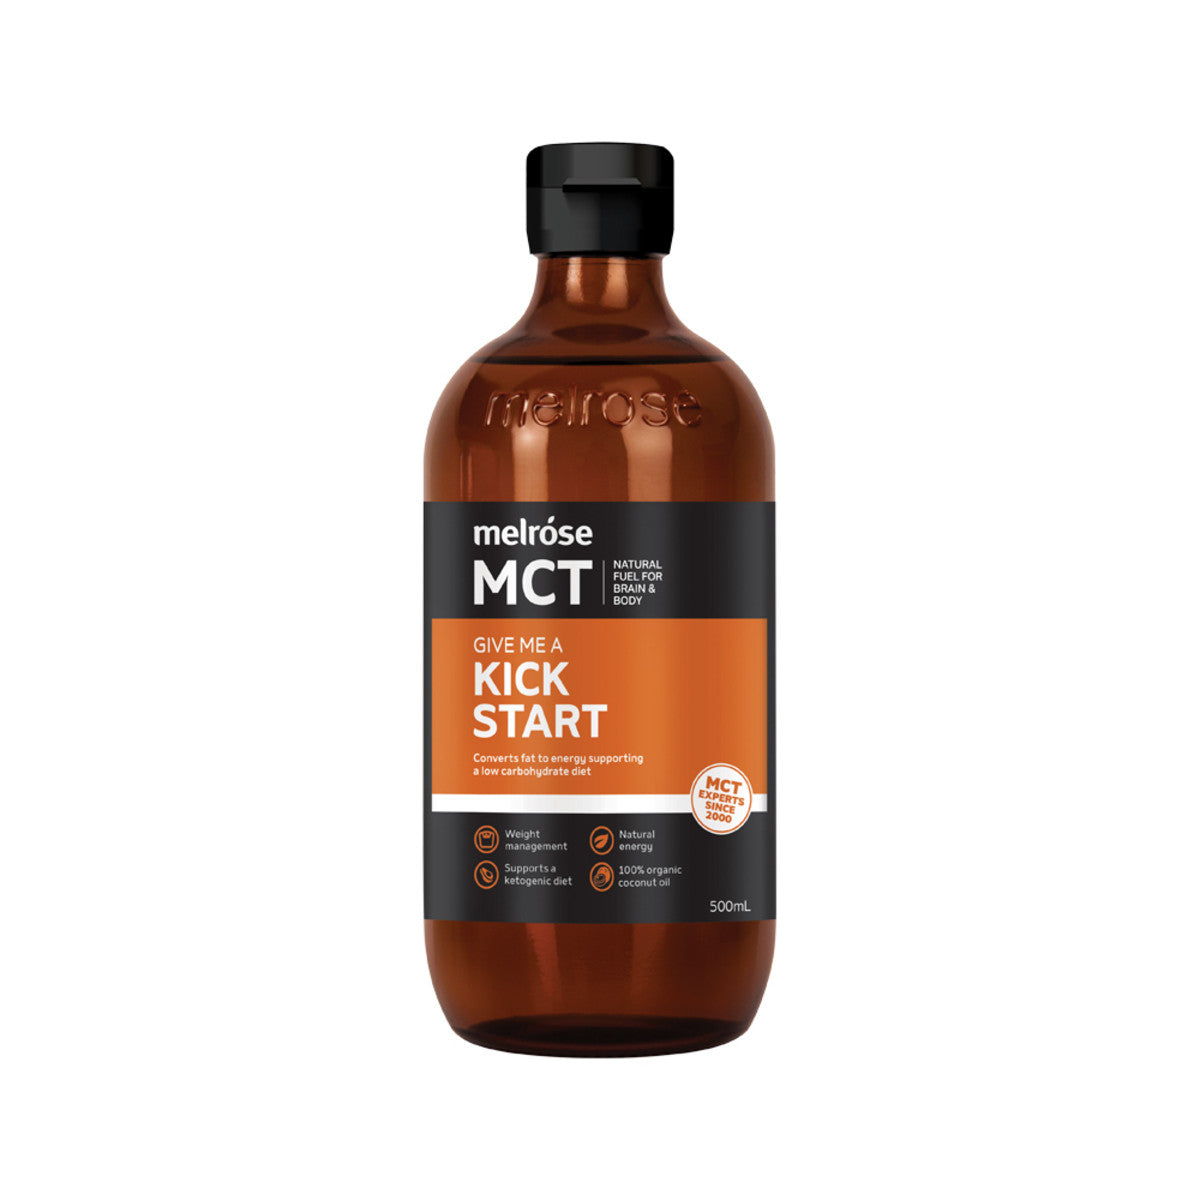 Melrose MCT Oil Give Me a Kick Start 500ml-The Living Co.